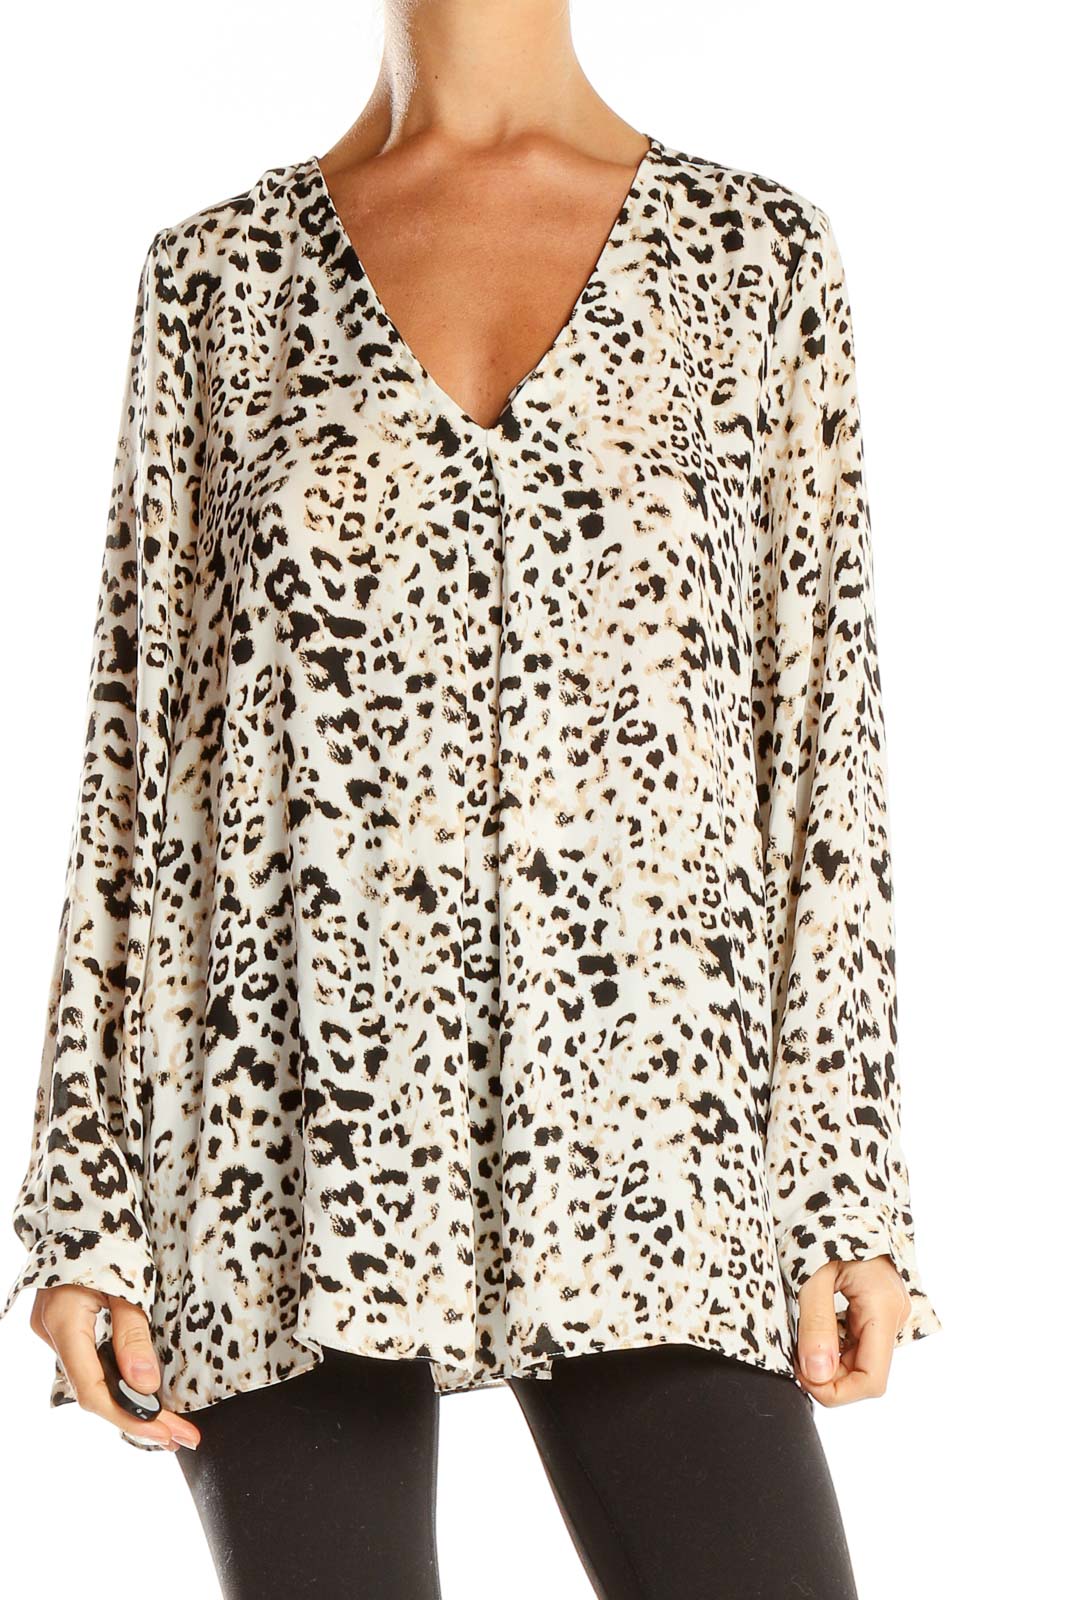 Beige Animal Print Blouse Front